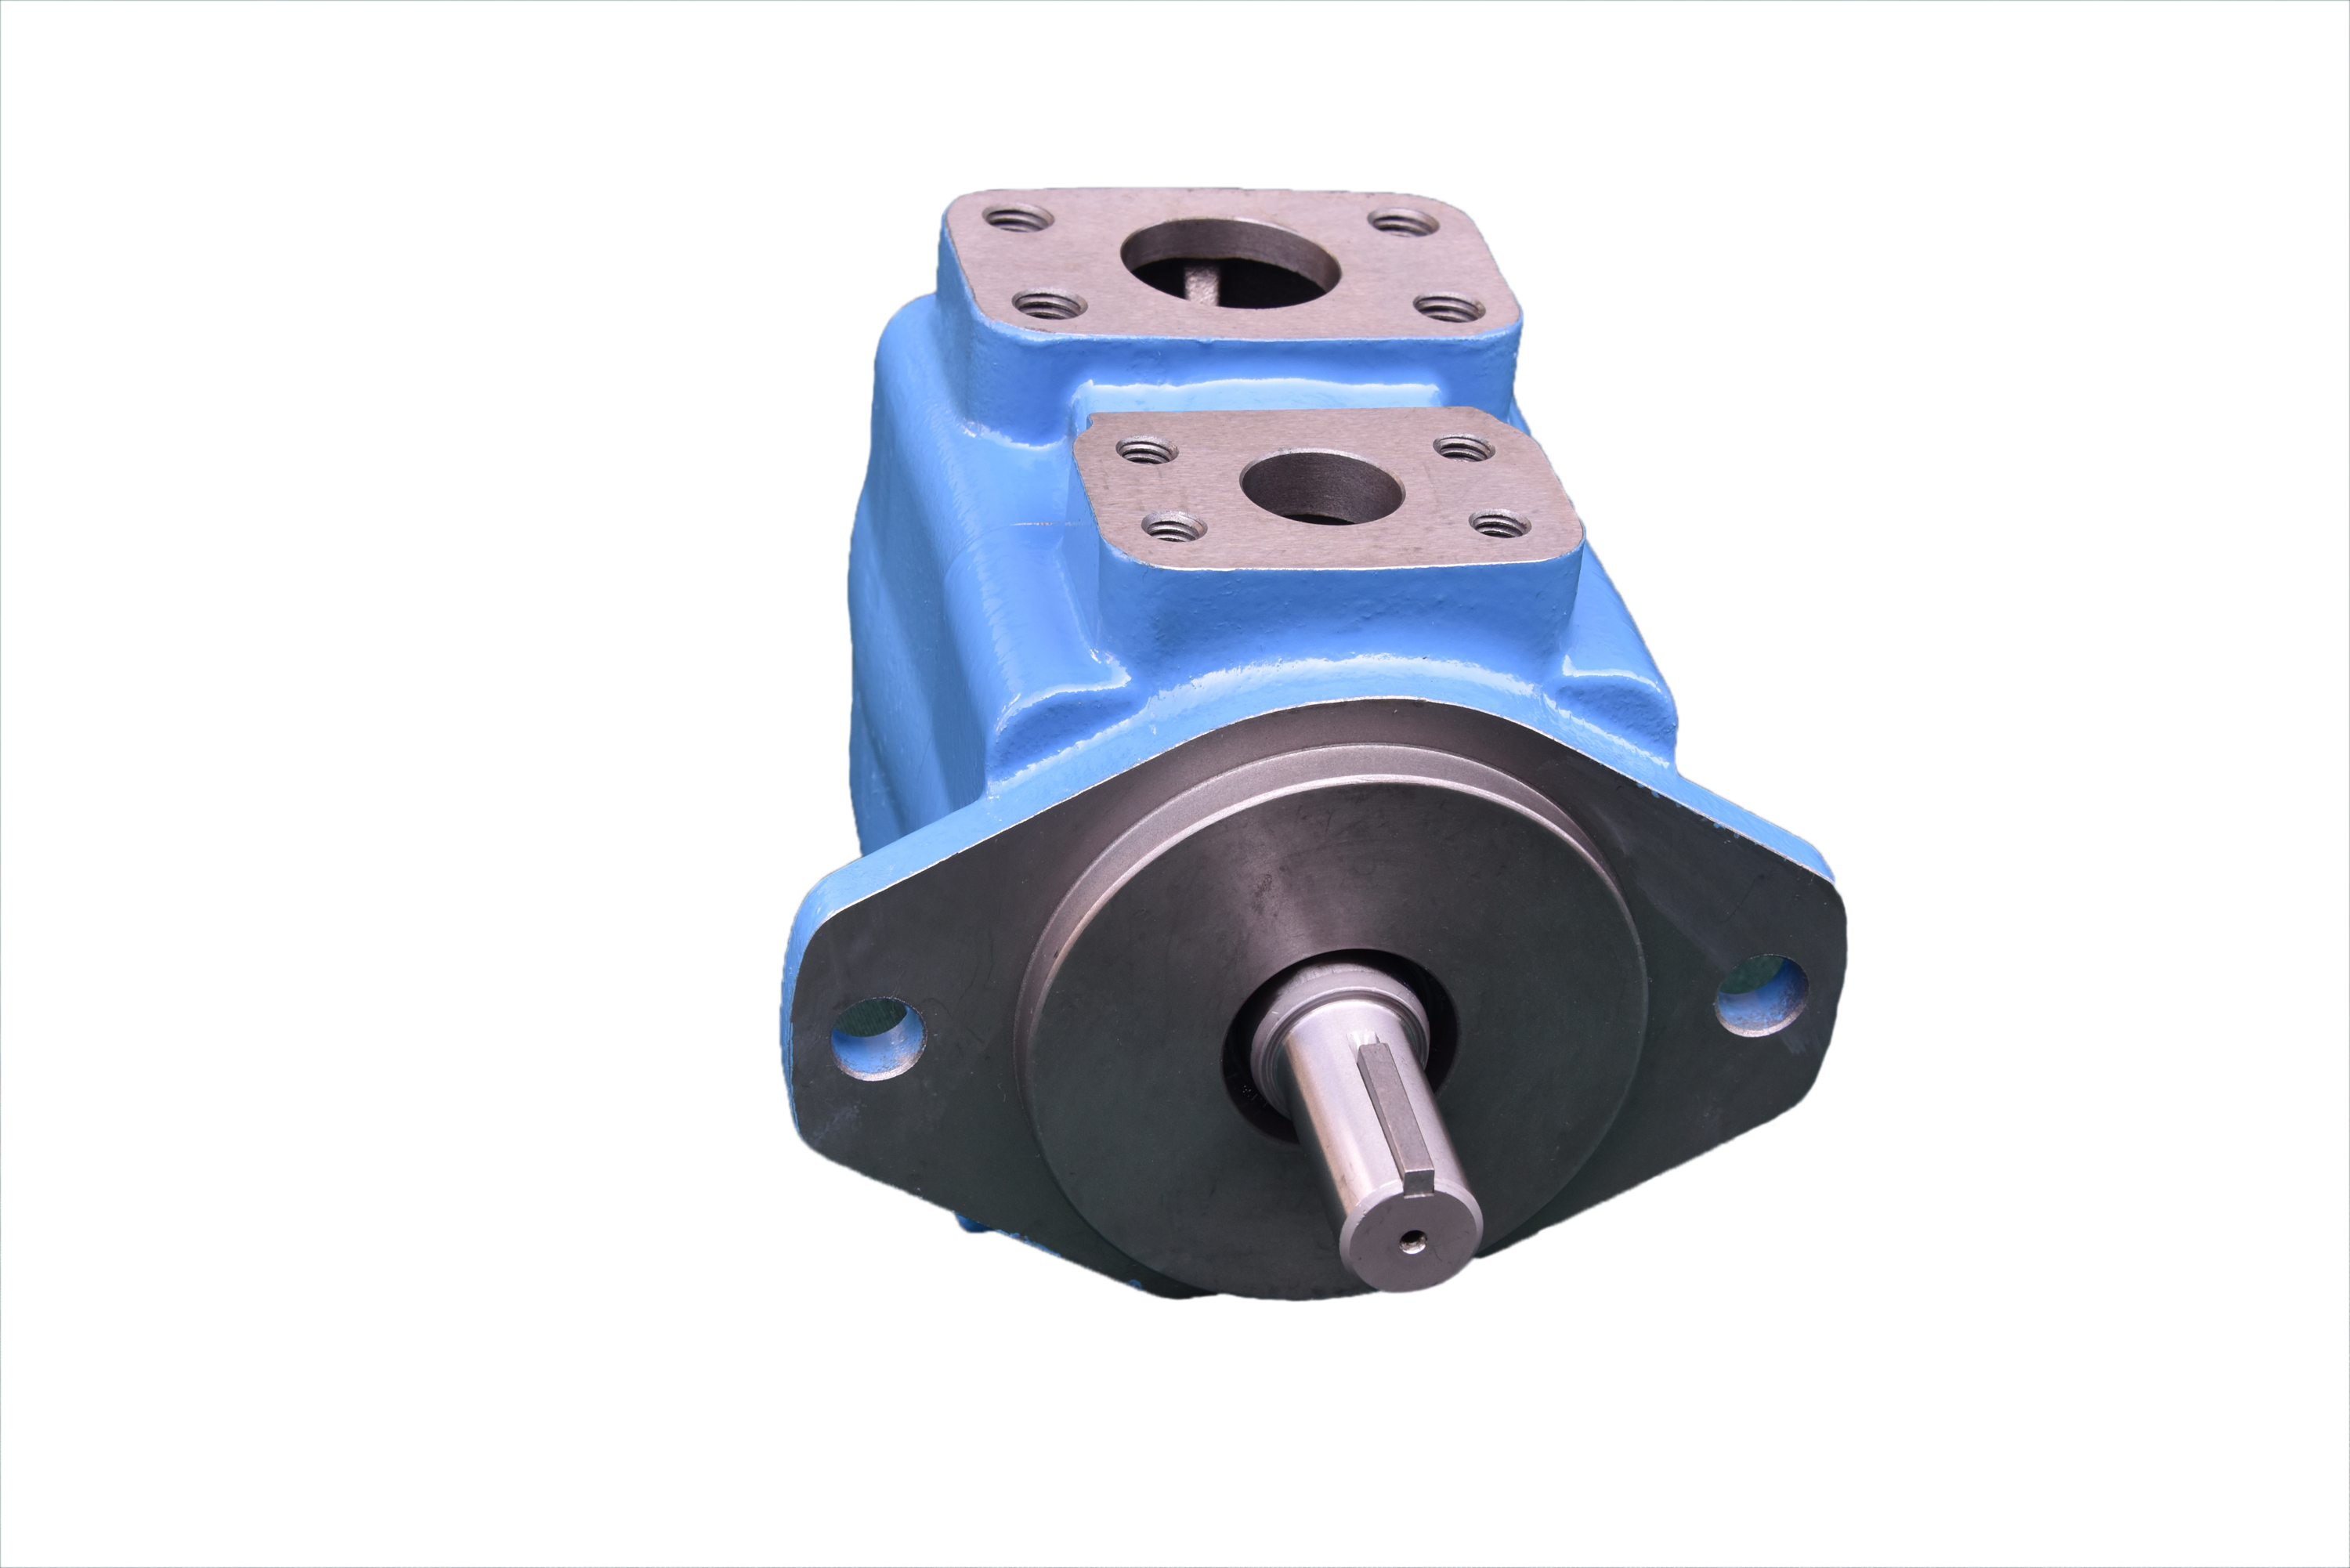 Why can the HYDRAULIC GEAR PUMP work cycle